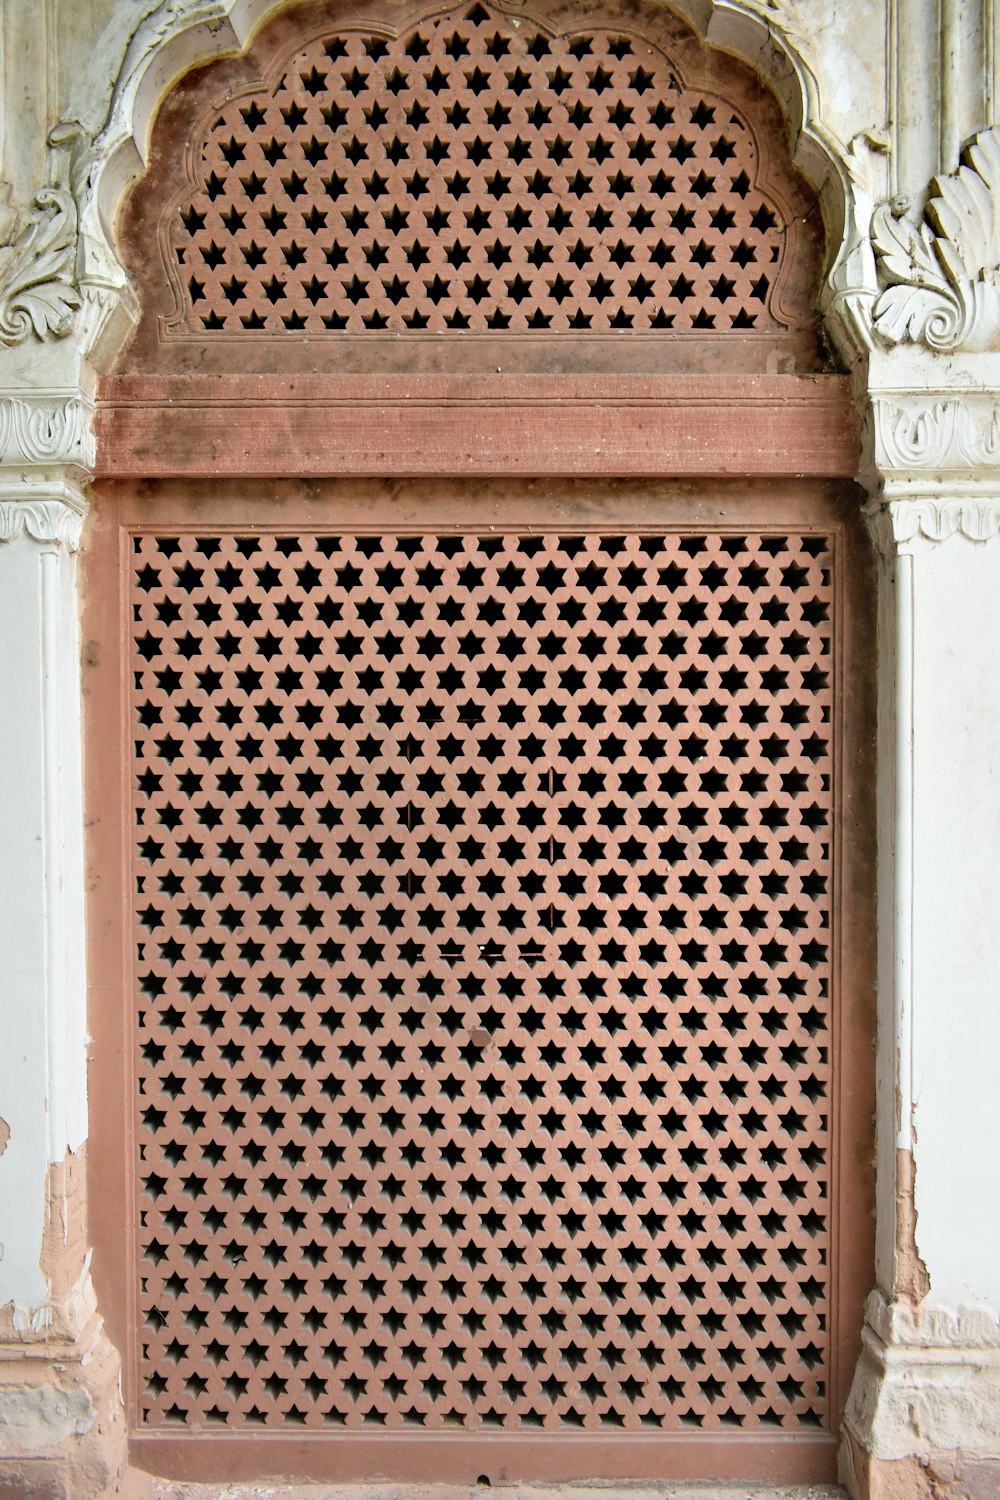 a close up of a metal grate on a wall